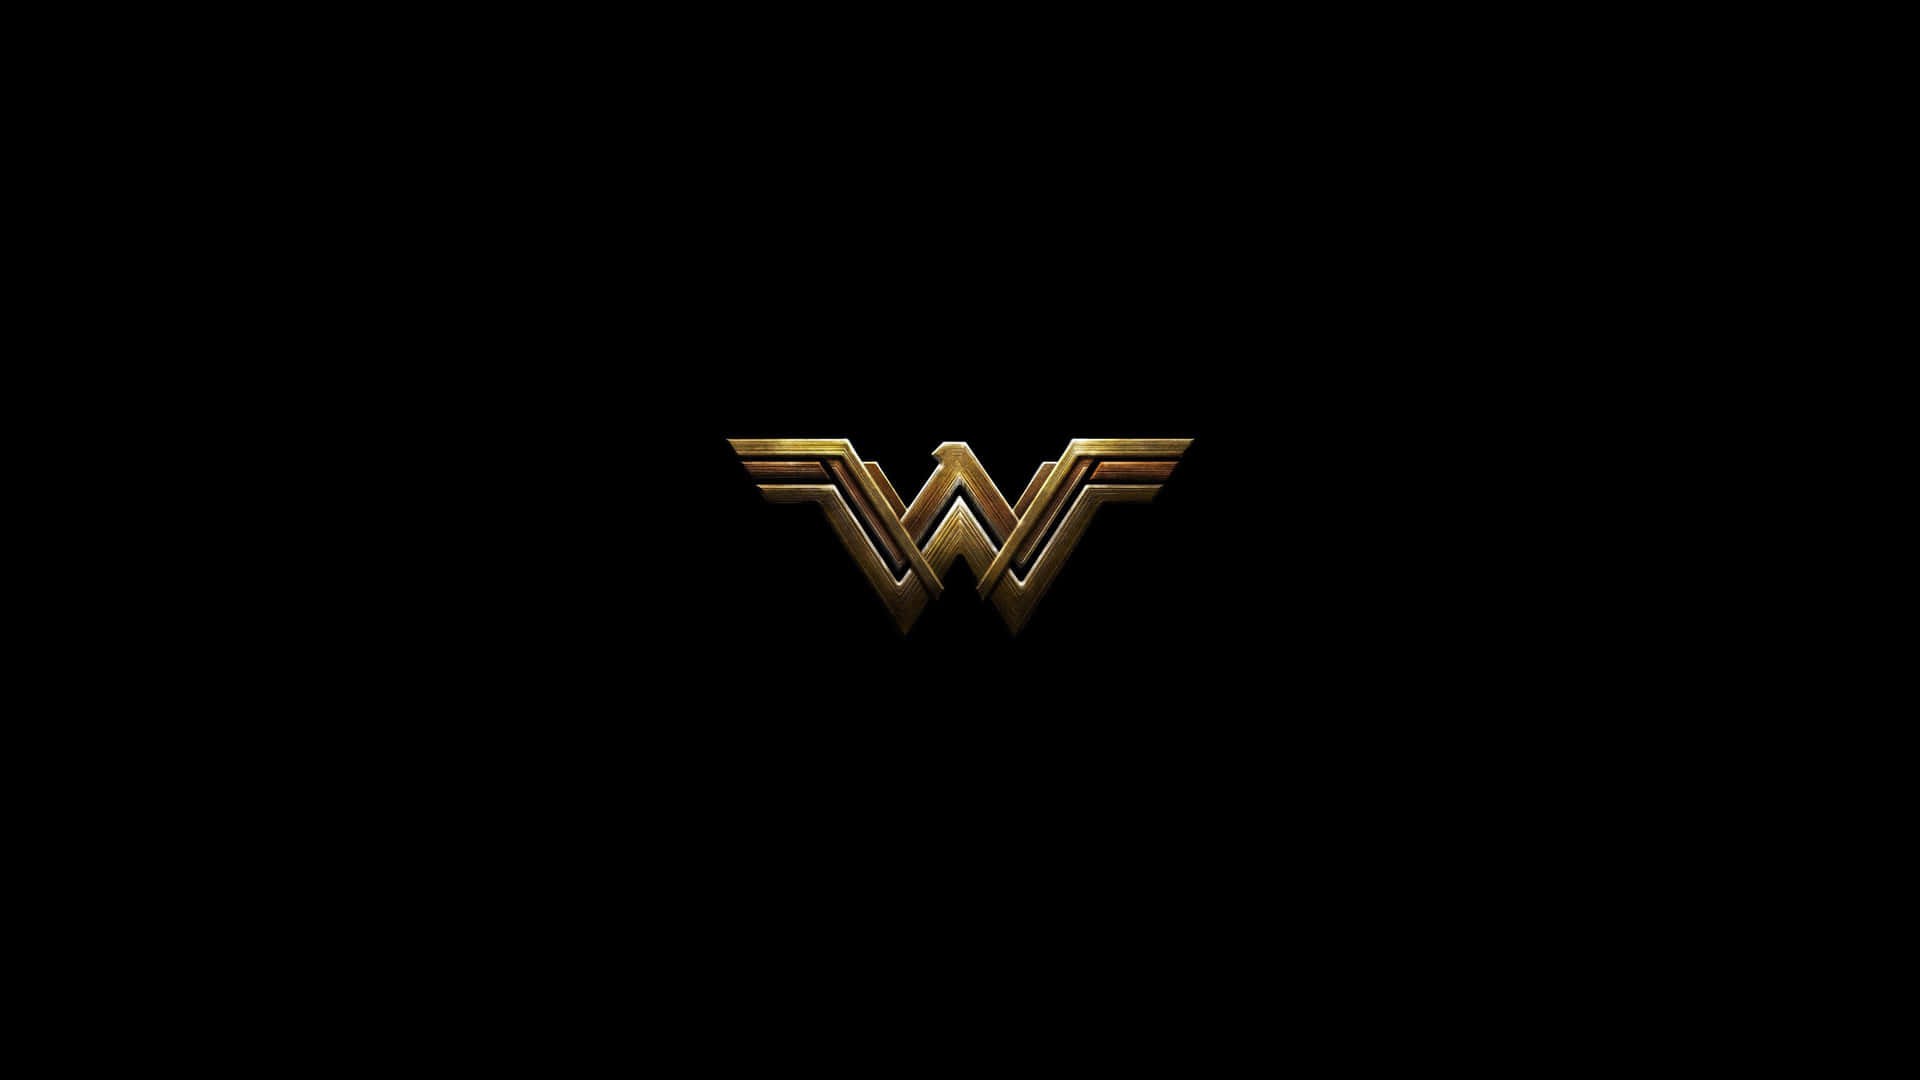 Wonder Woman in action on a battle scene background